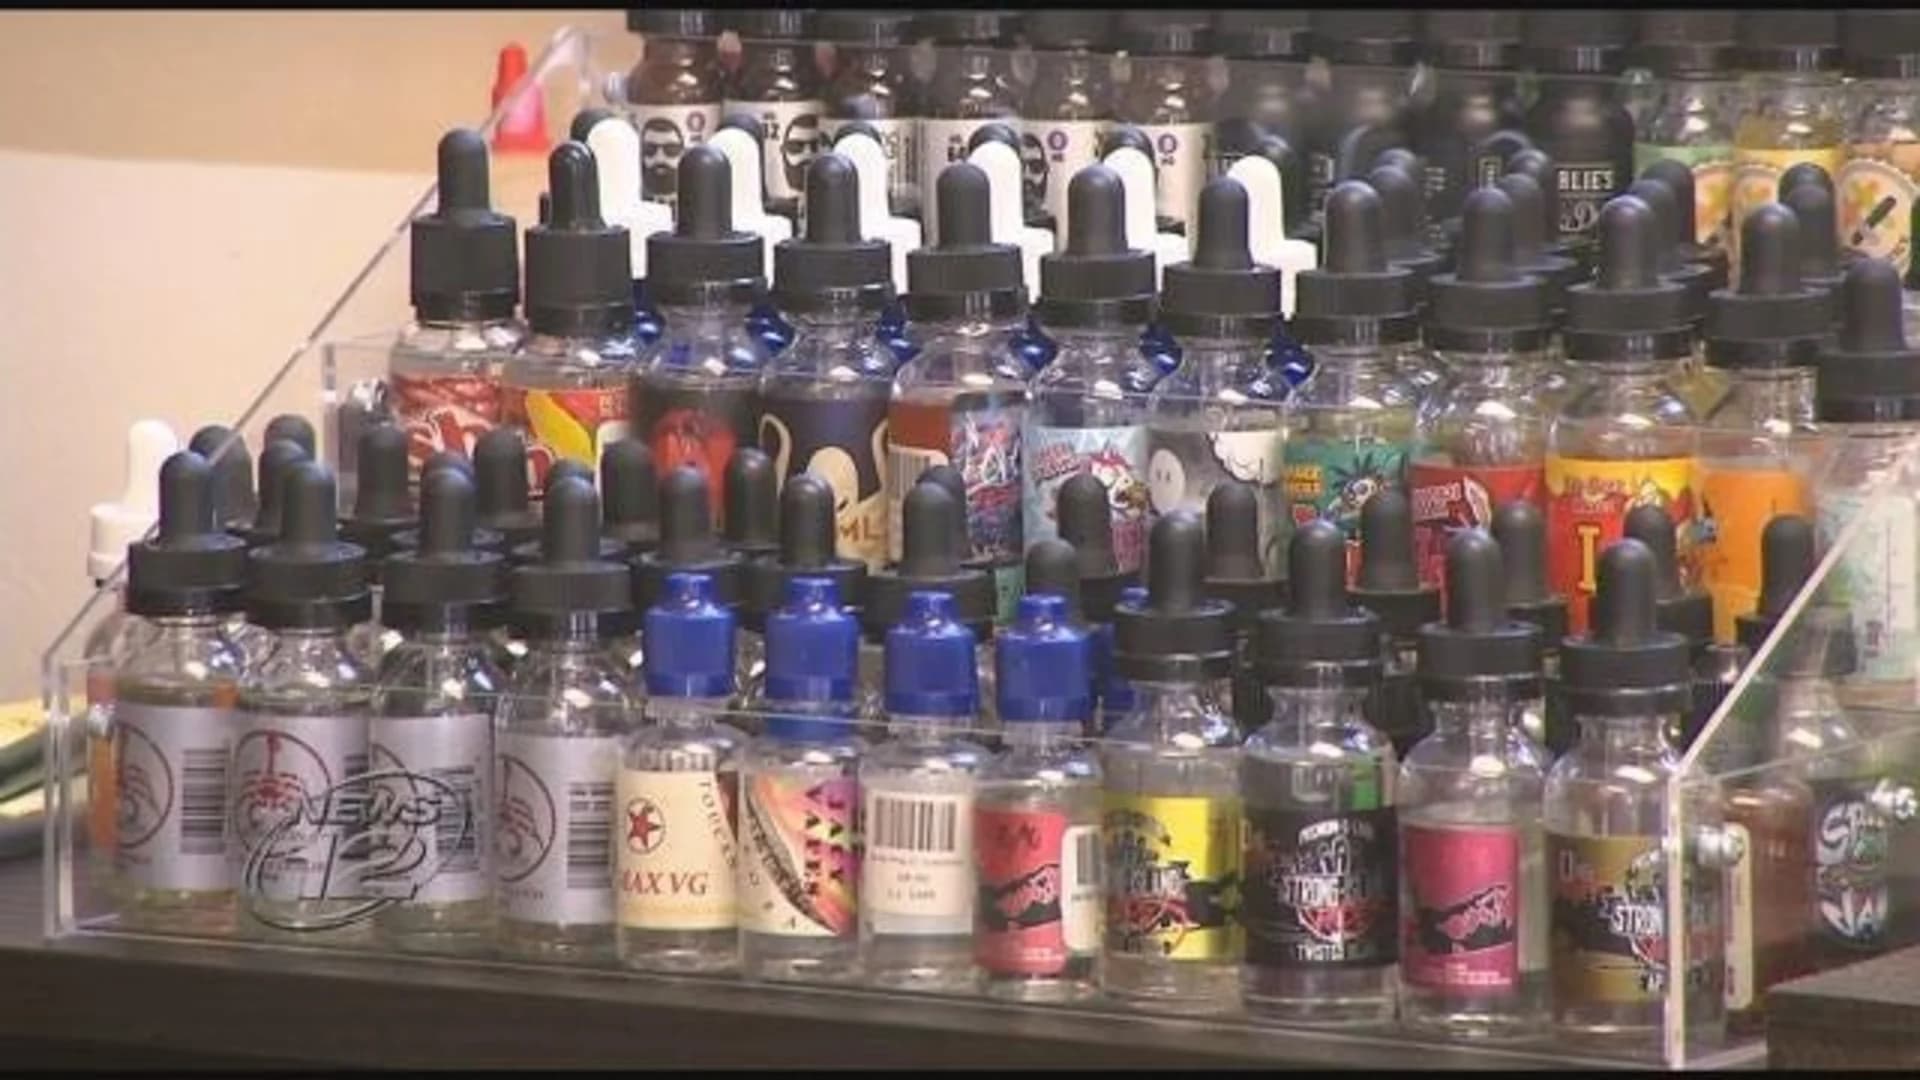 Nassau lawmakers slated to vote on vape product bill